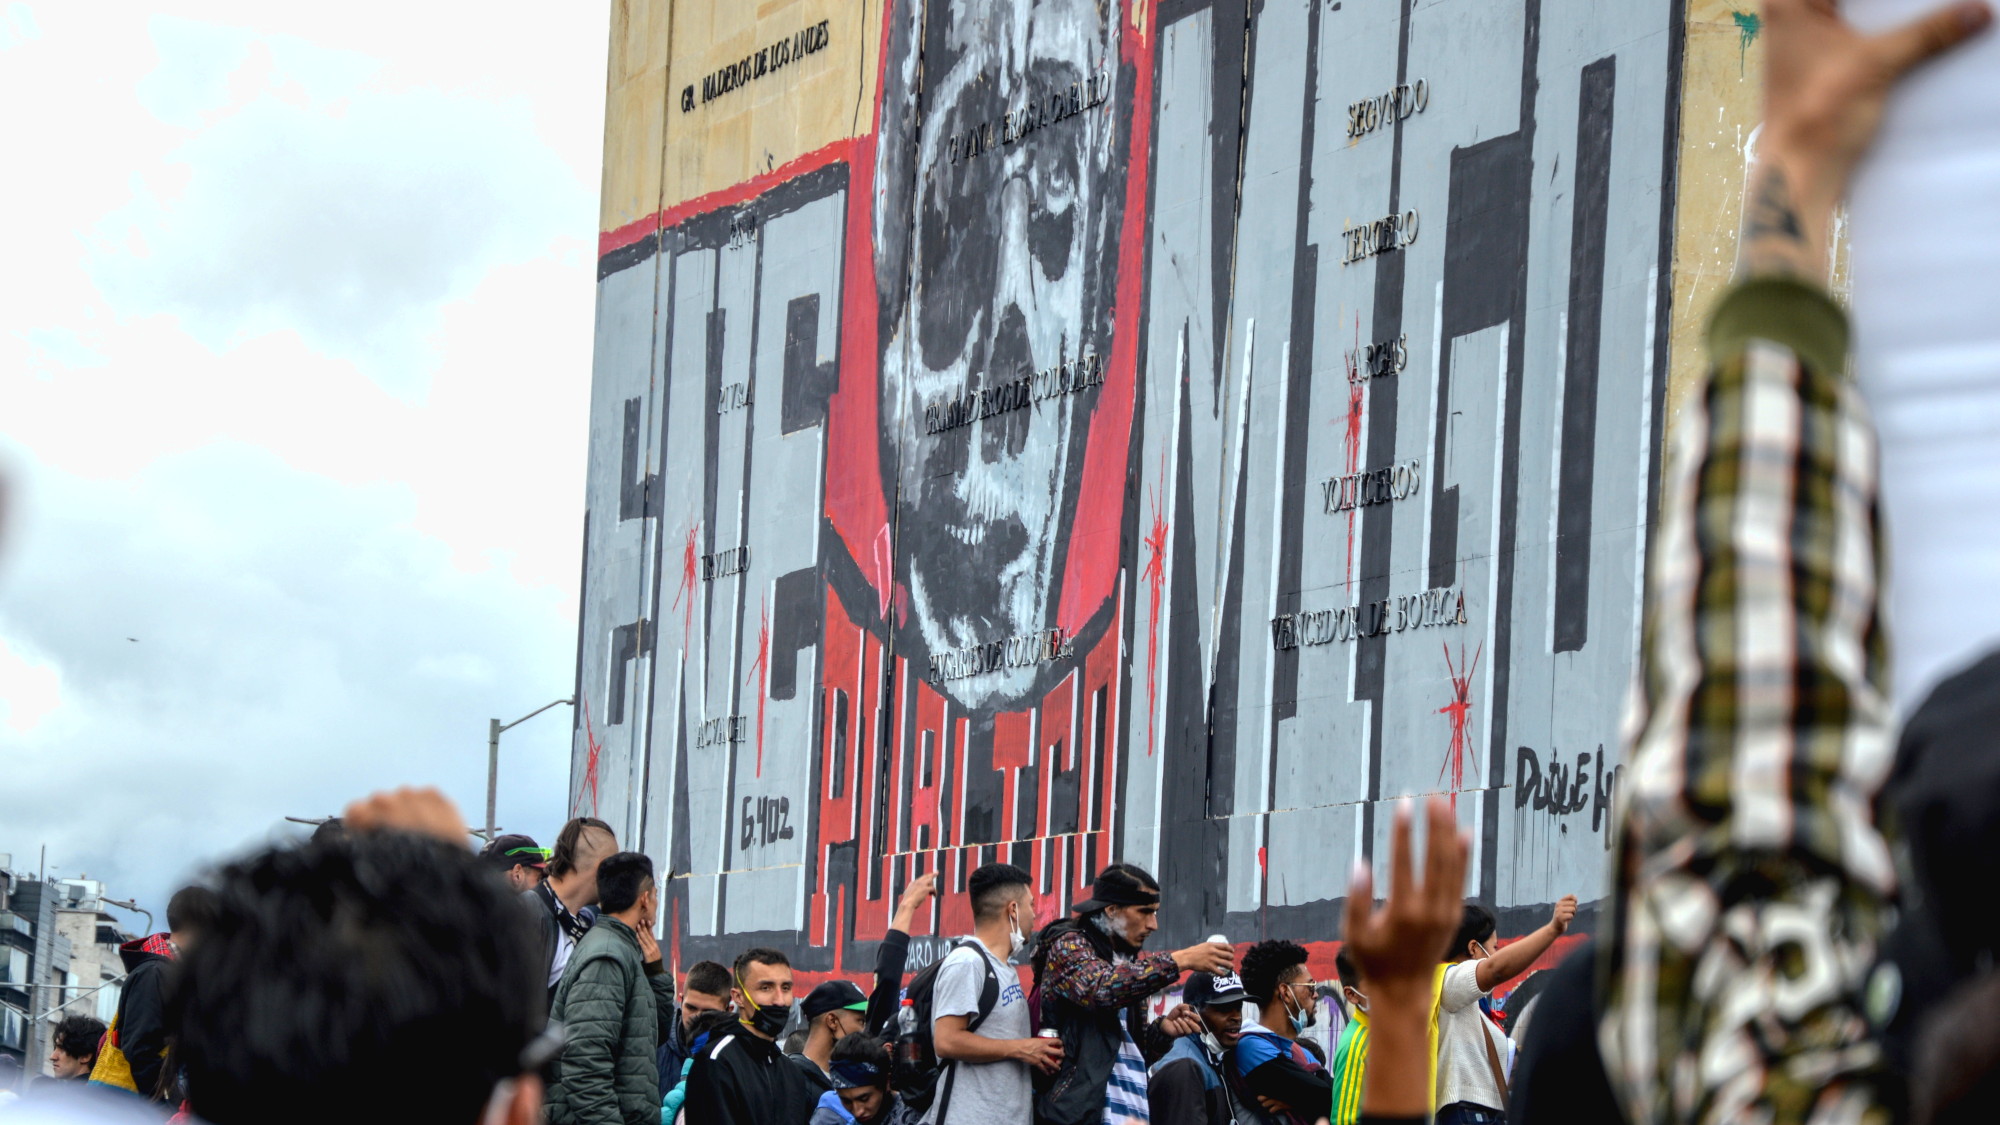 Young people in a protest next to the former Monument to the Heroes of Bogotá. Painted on one of the walls reads "public enemy" under a caricature of Álvaro Uribe that shows him as a skull with his features. Photo: Andres Gomez